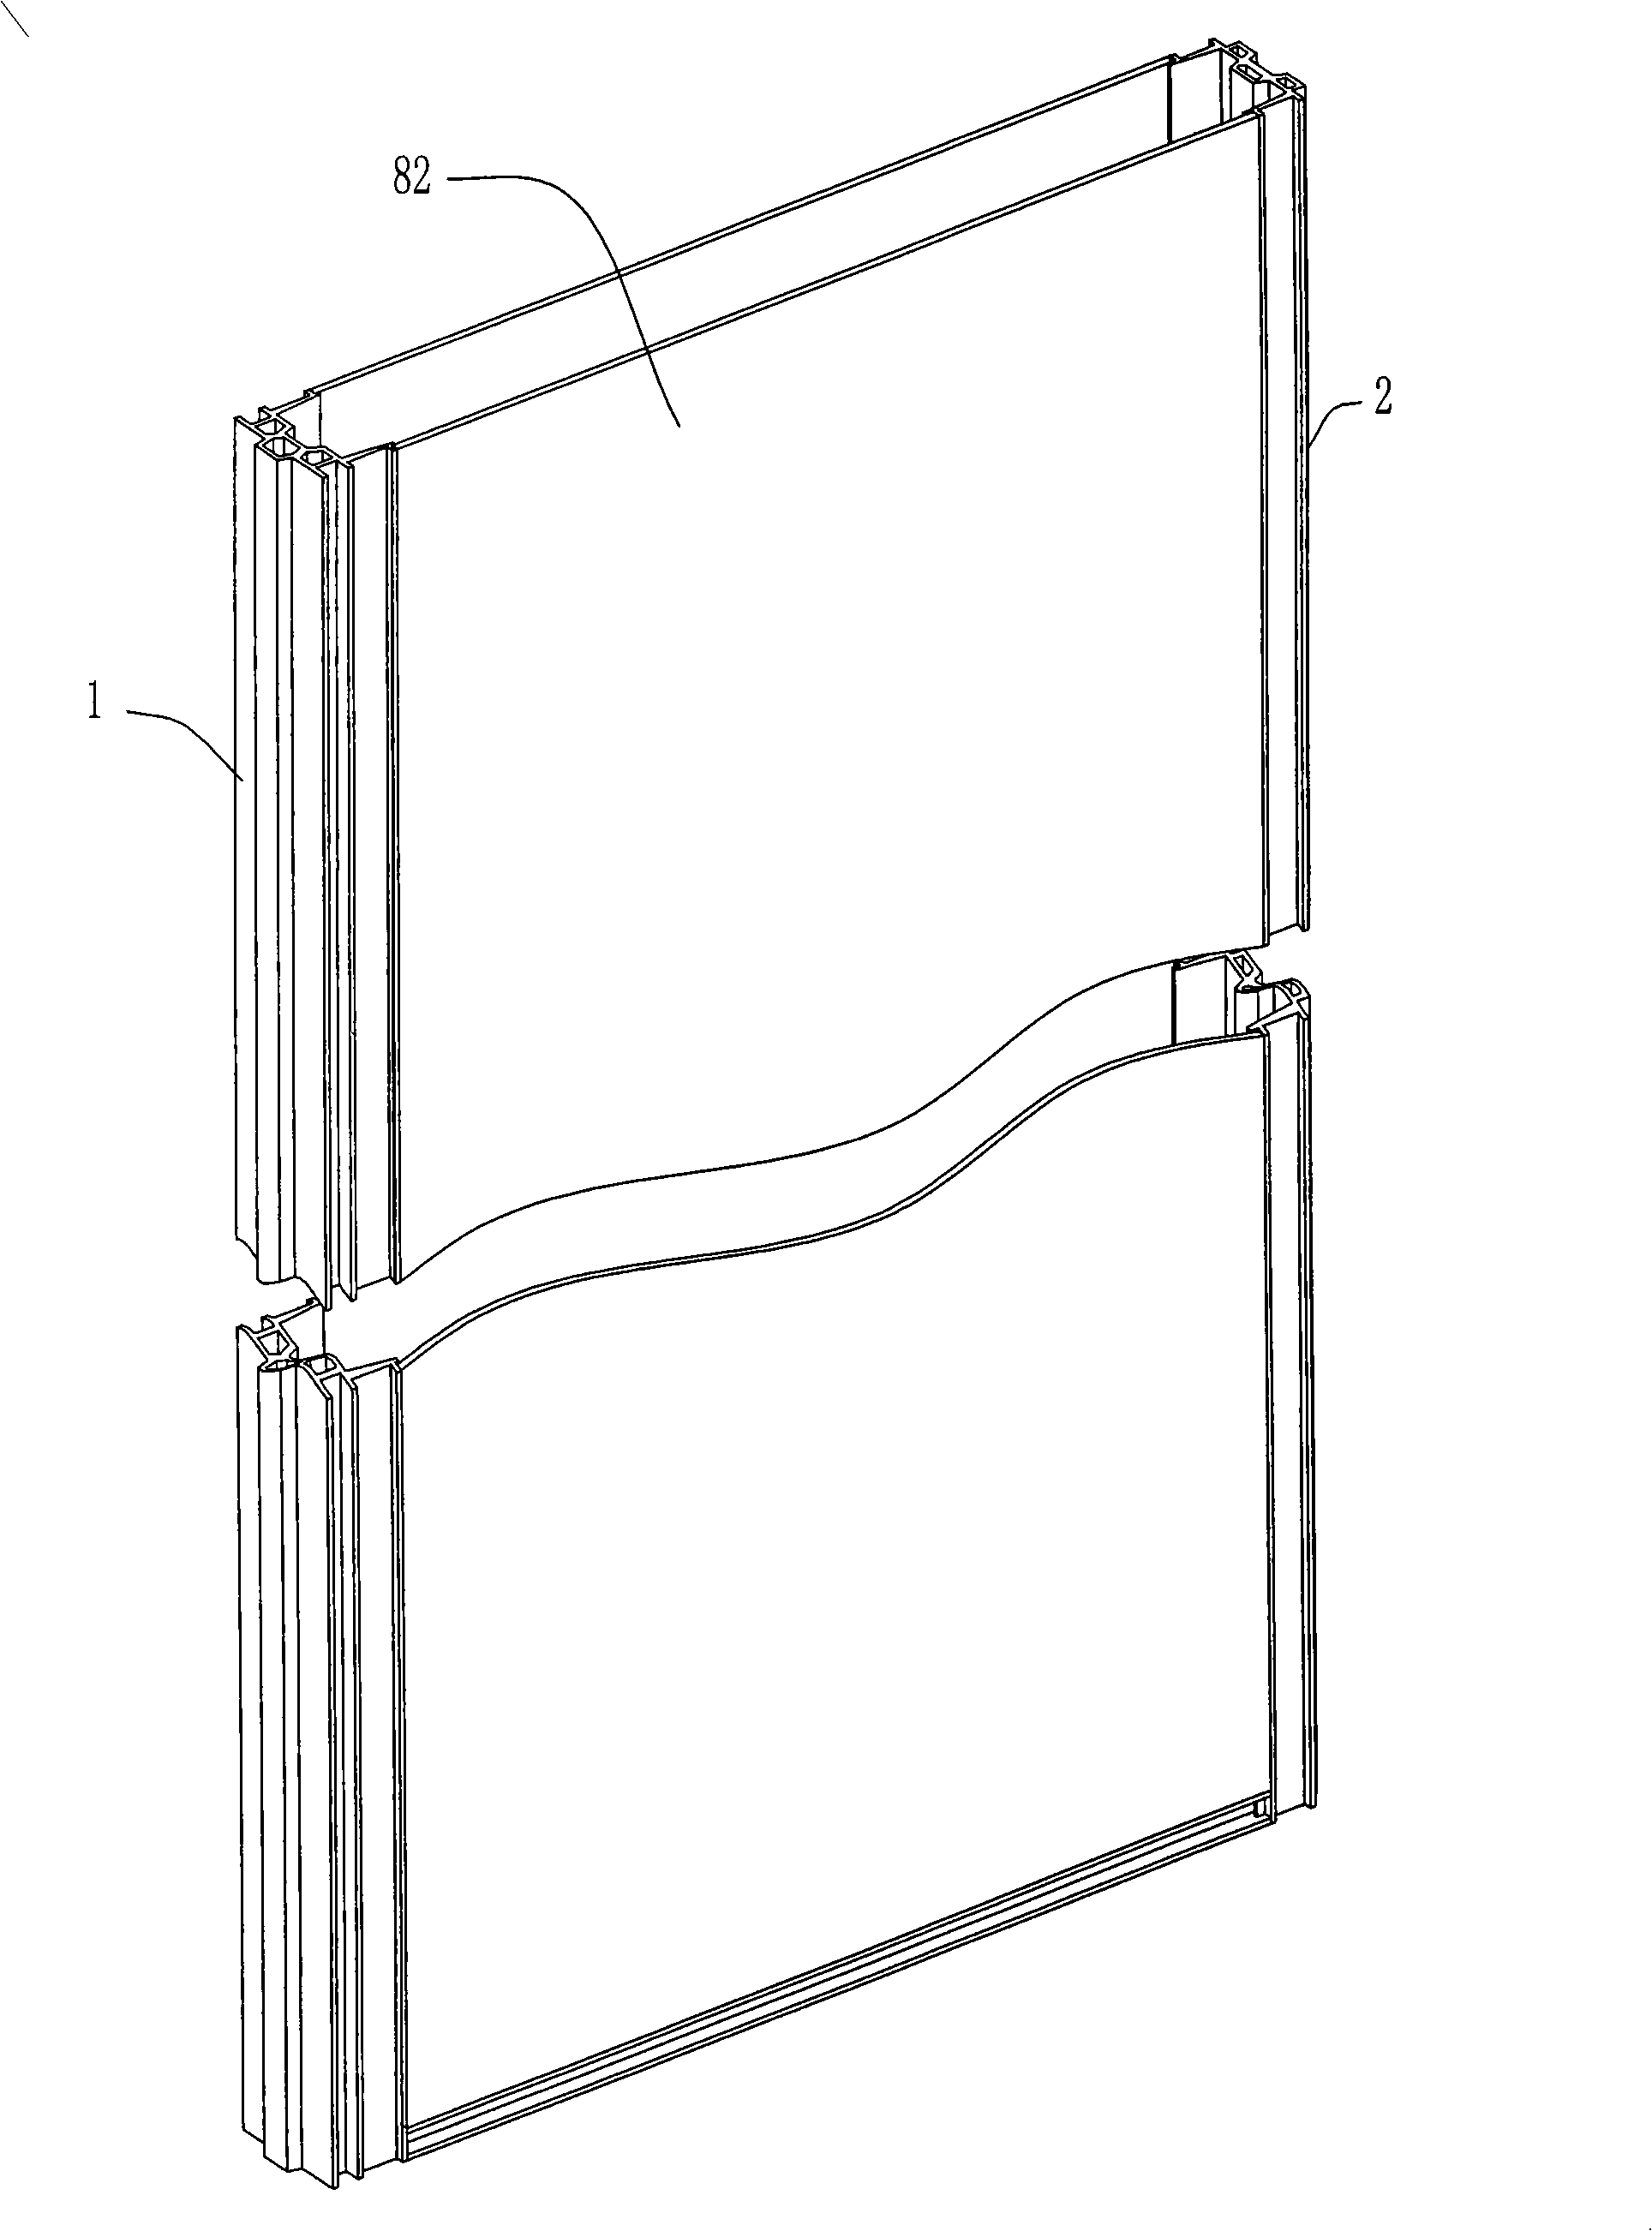 Die for fabricating light wall board and use method thereof